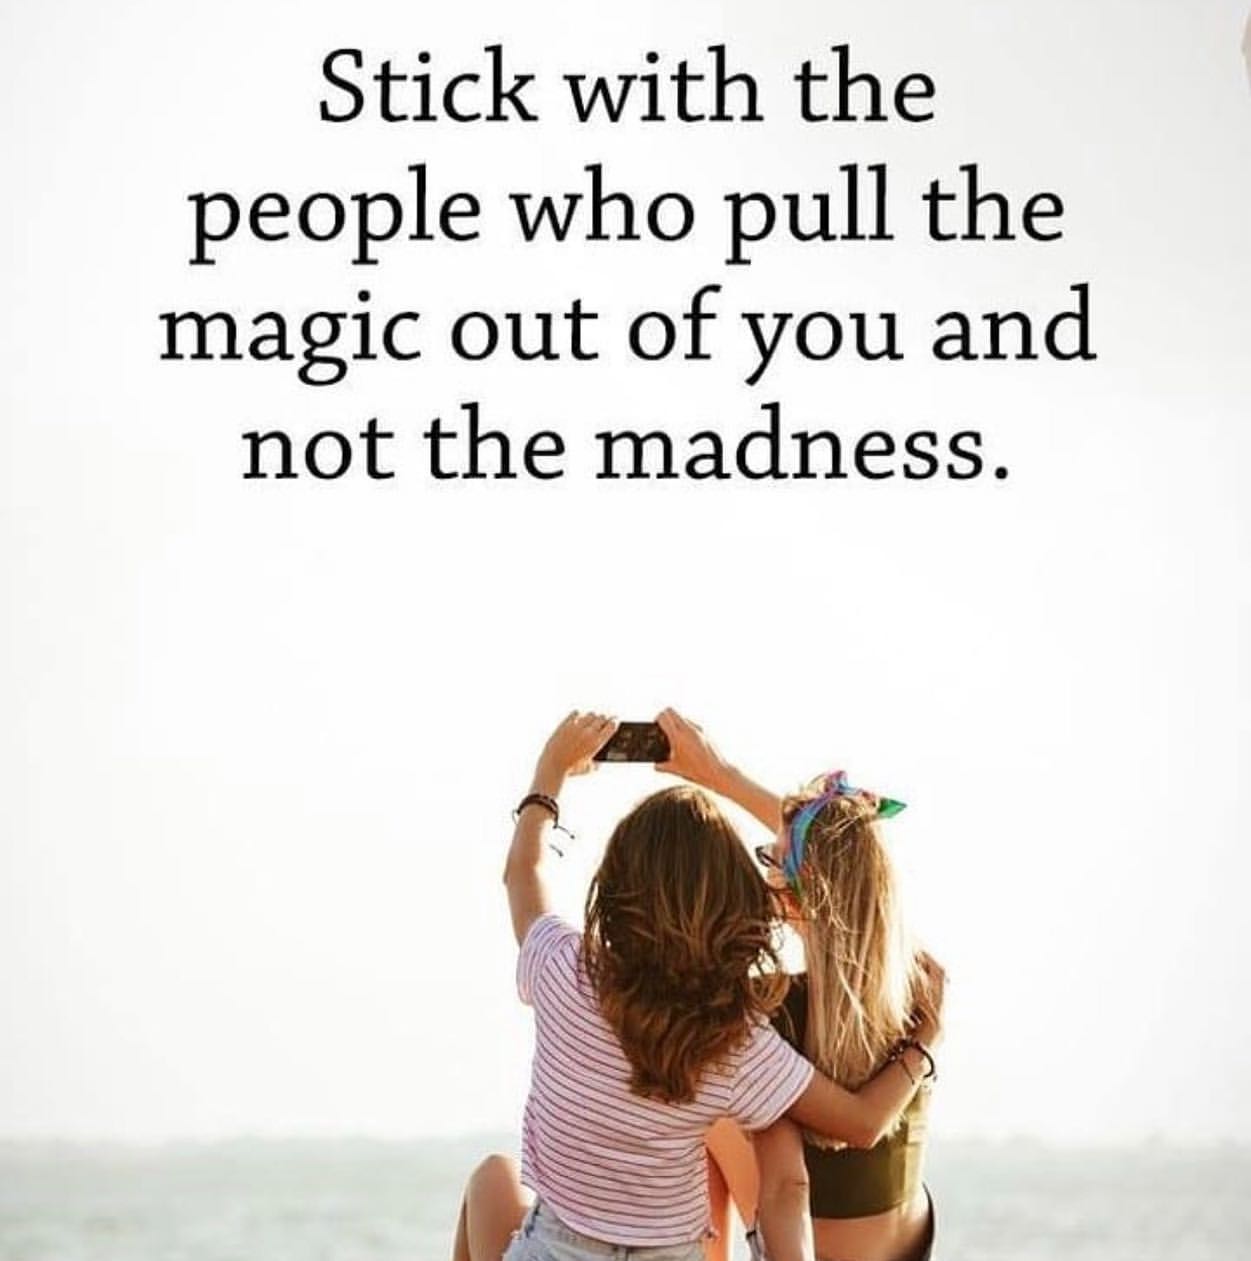 Stick with the people who pull the magic out of you and not the madness.